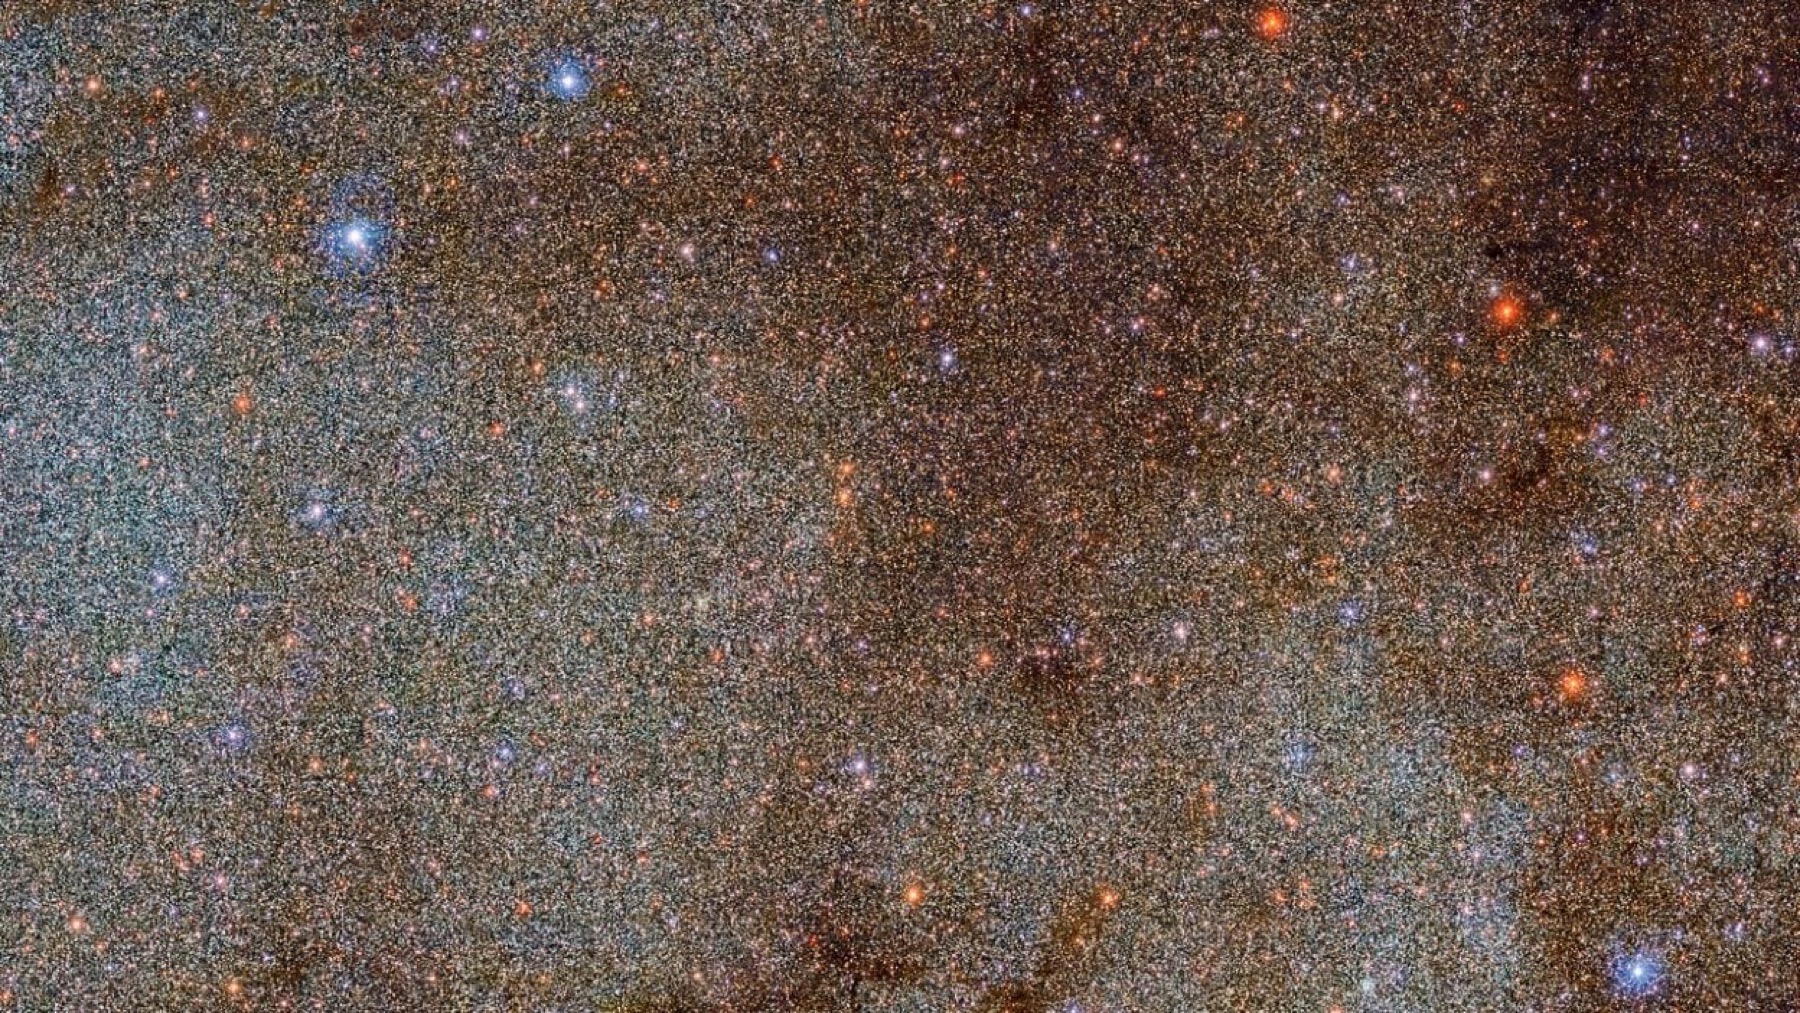 Scientists Drop Absolutely Stunning New View of the Milky Way Galaxy